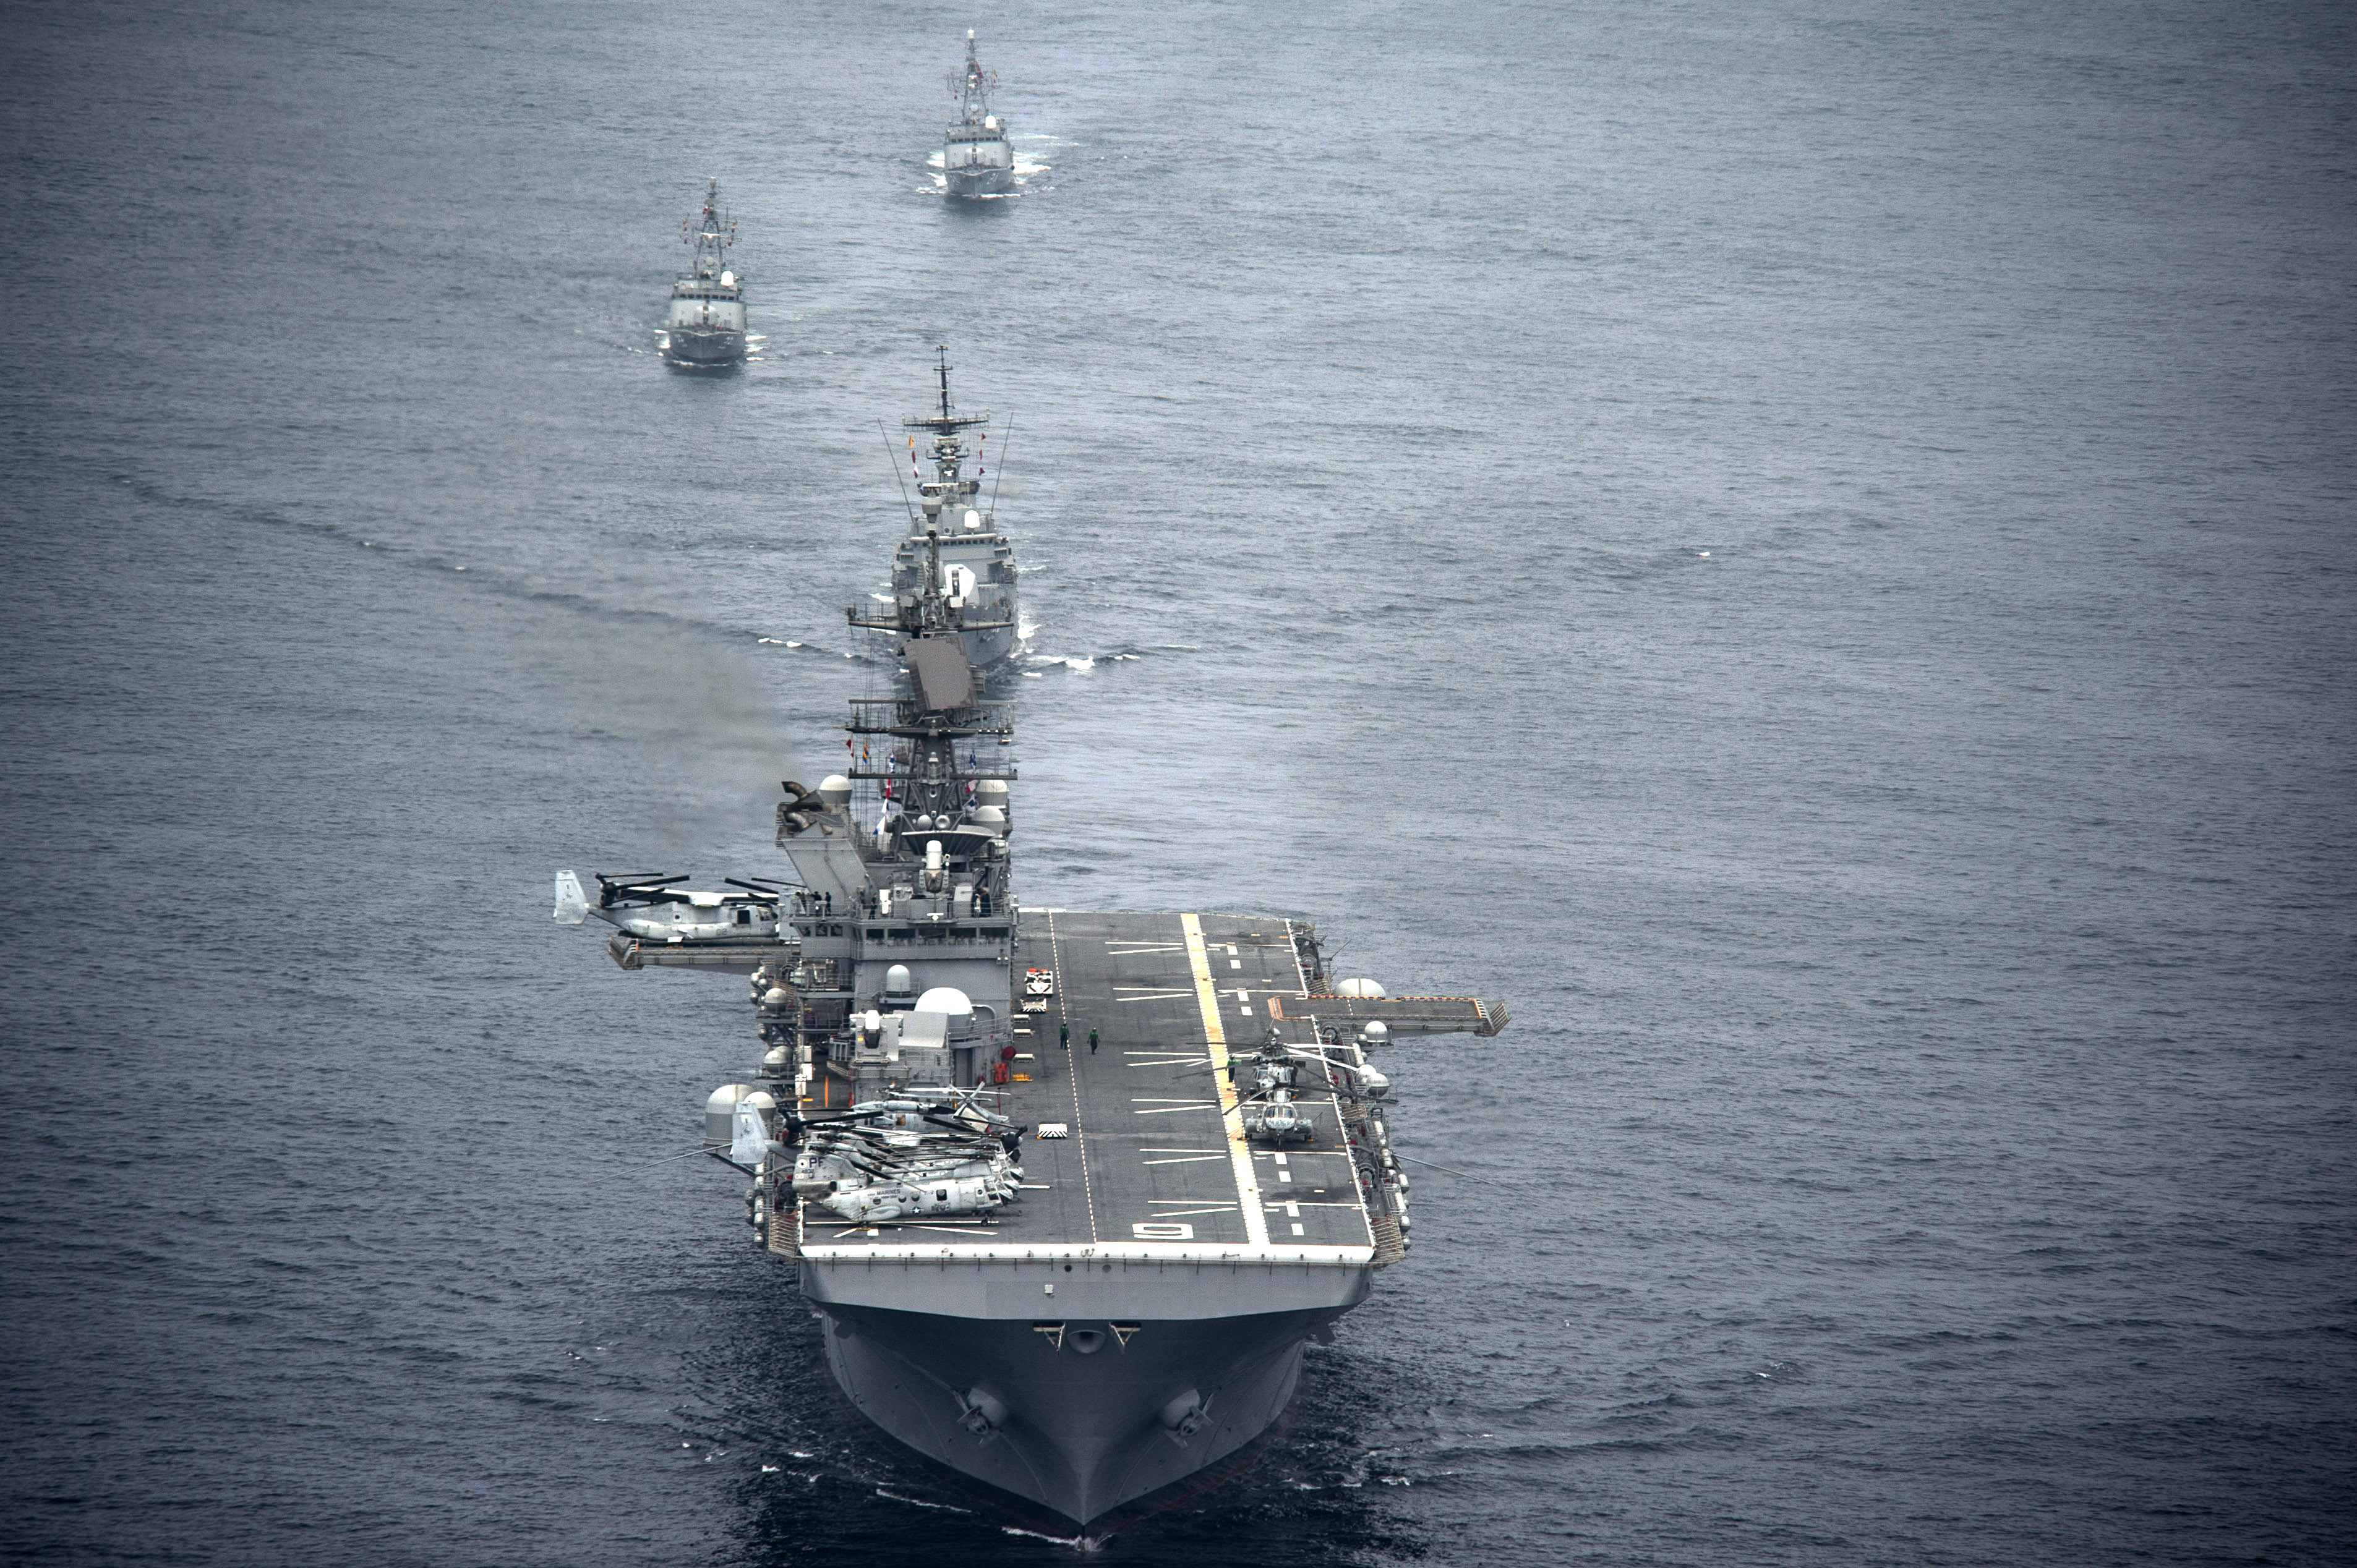 The_amphibious_assault_ship_USS_America_(LHA_6),_front,_and_Peruvian_Navy_ships_sail_in_formation_during_a_passing_exercise_in_the_Pacific_Ocean_Sept_140903-N-MZ309-1097.jpg